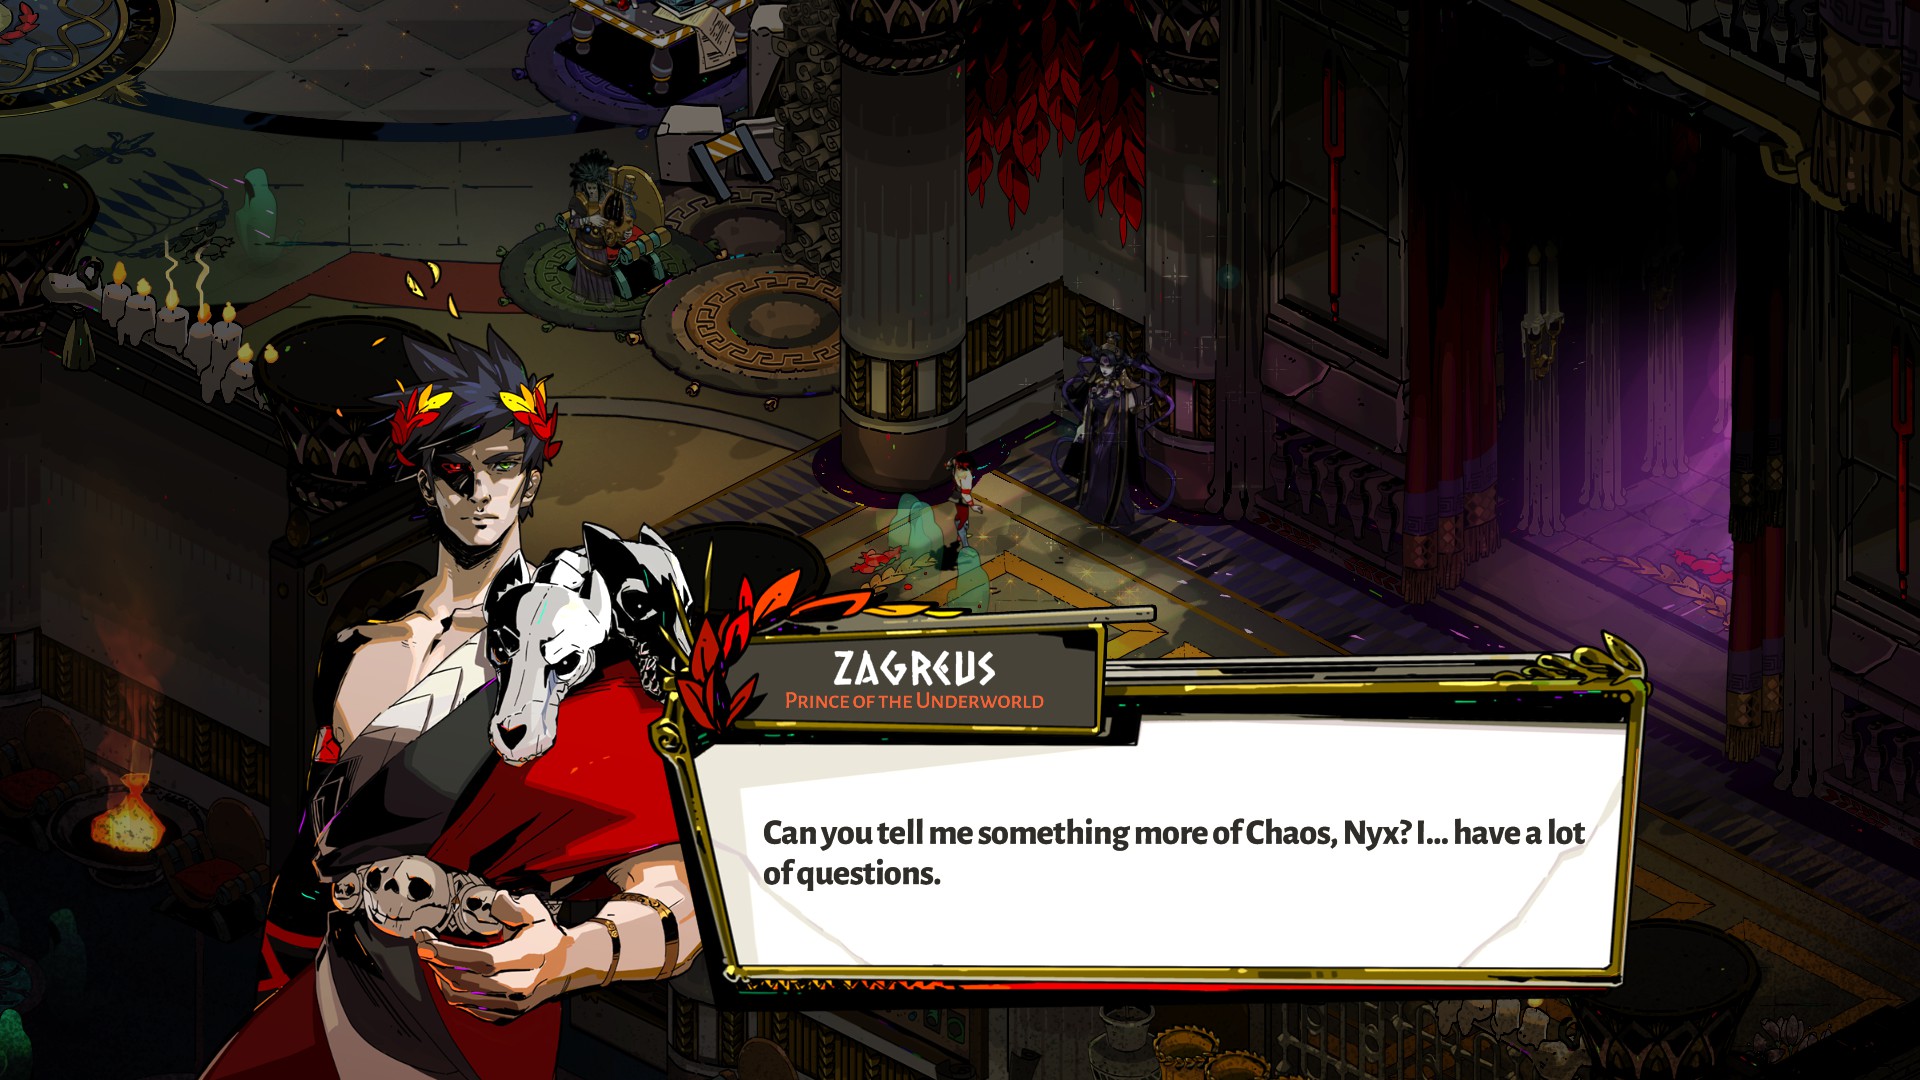 Image of Zagreus from Hades talking to Nyx, asking about Chaos.